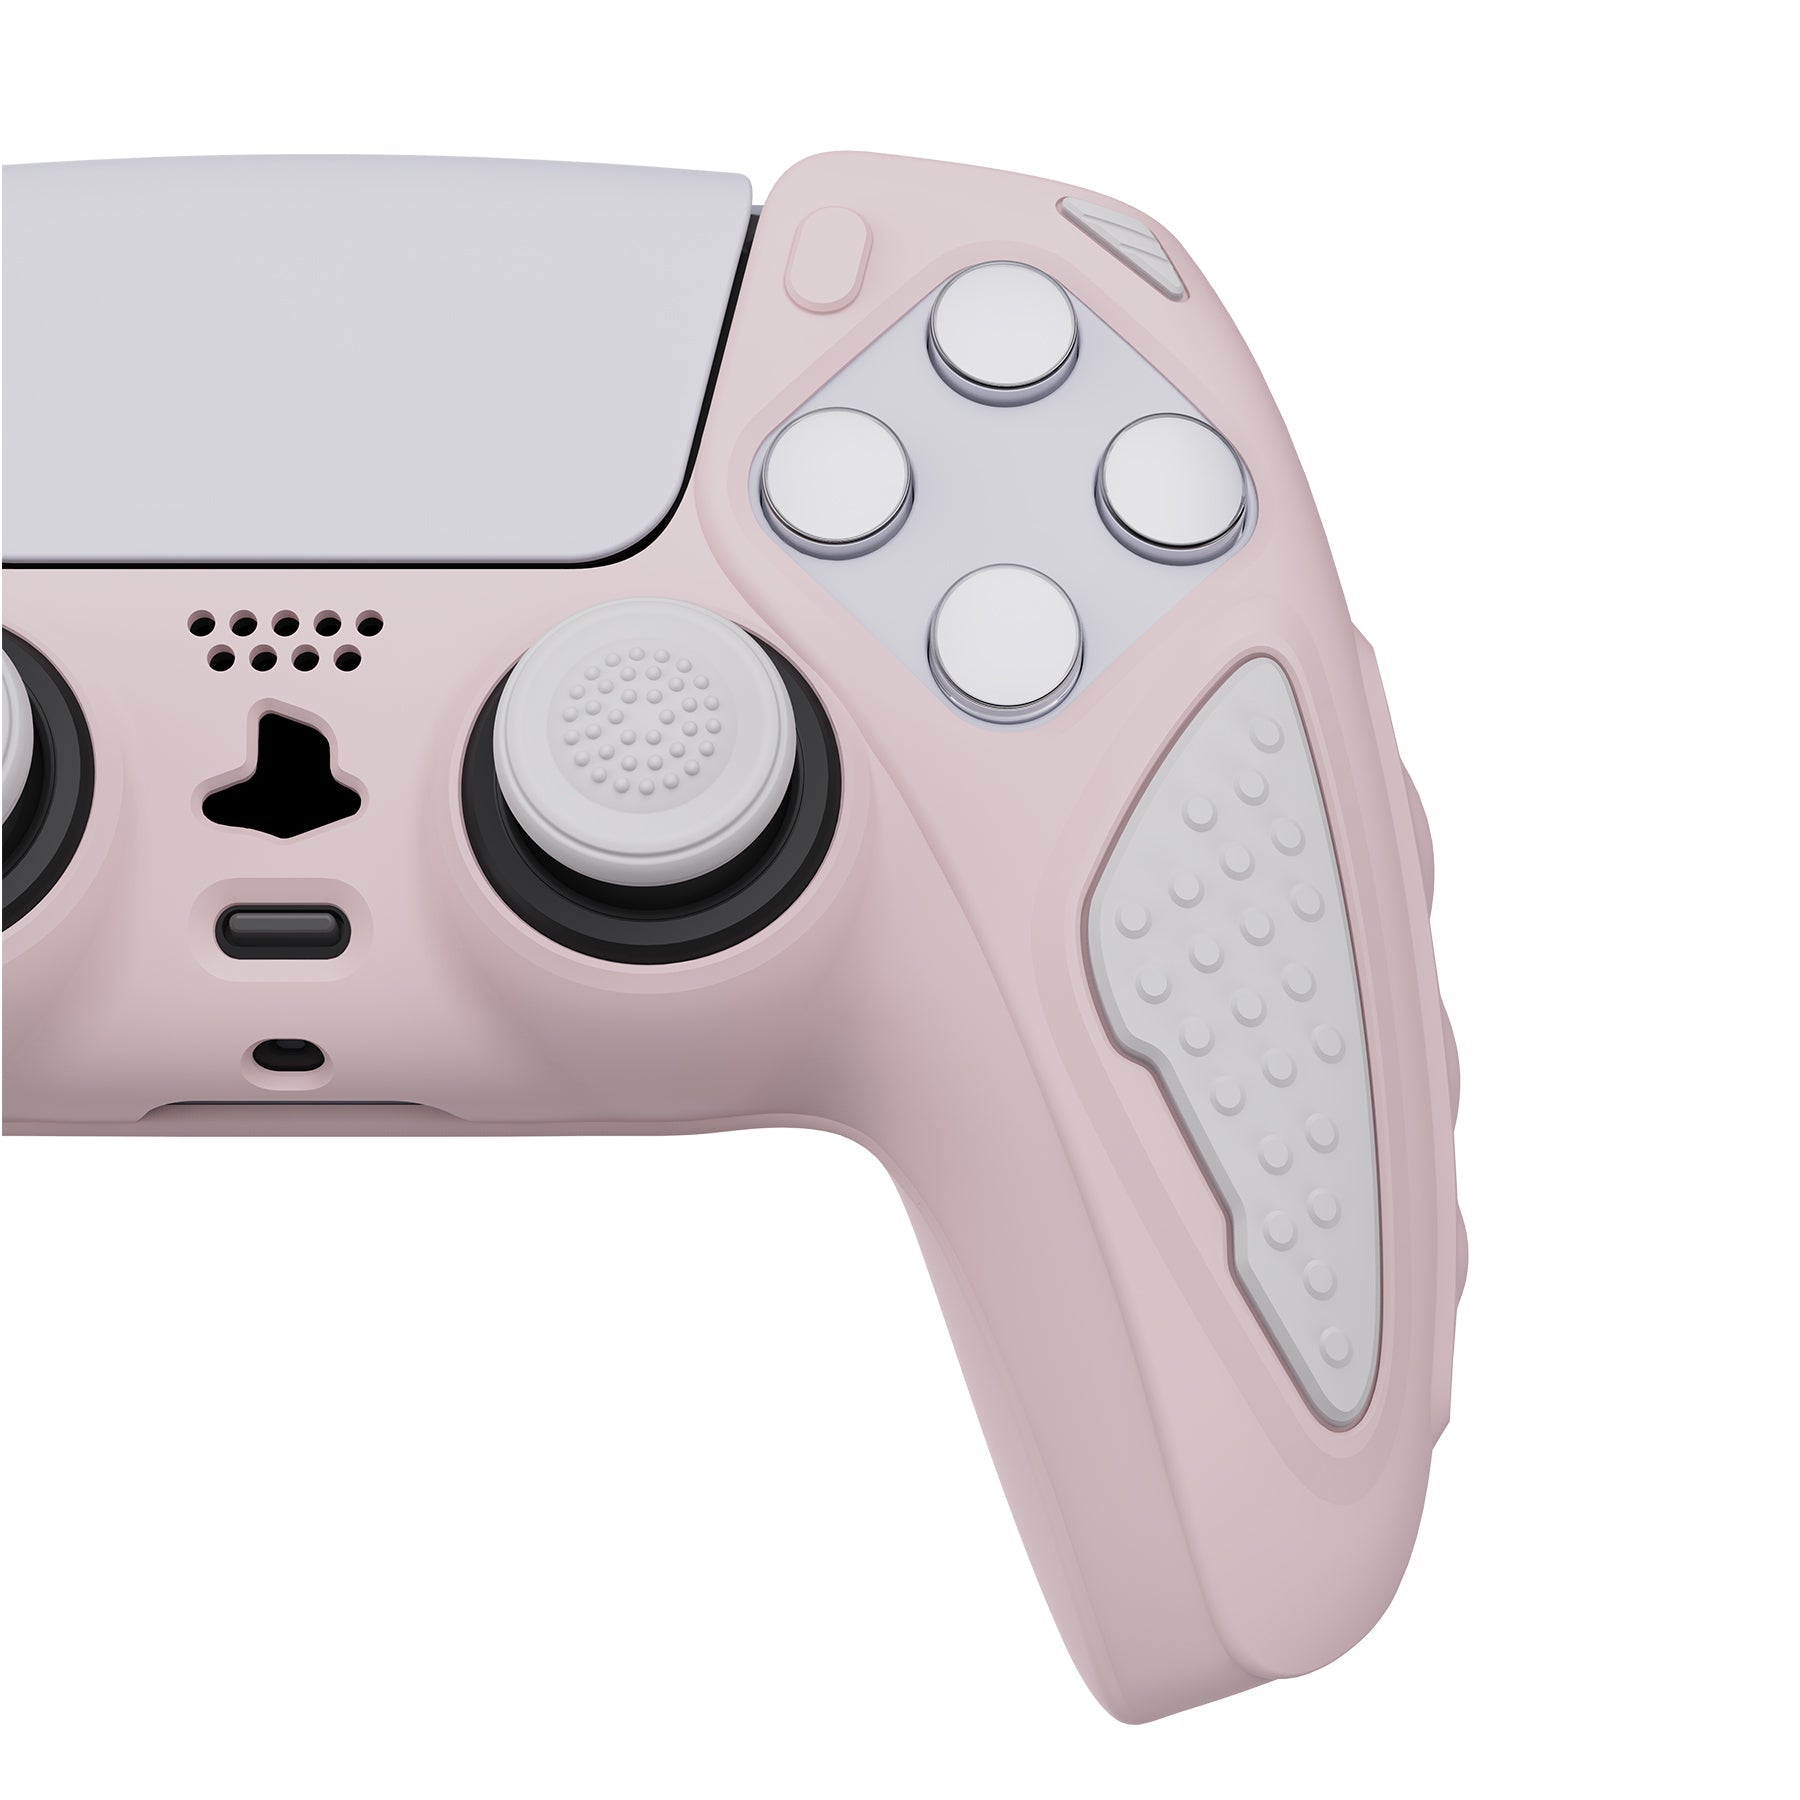 PlayVital Knight Edition Passion Cherry Blossoms & White Two Tone Anti-Slip Silicone Cover Skin for Playstation 5 Controller, Soft Rubber Case for PS5 Controller with Thumb Grip Caps - QSPF008 PlayVital